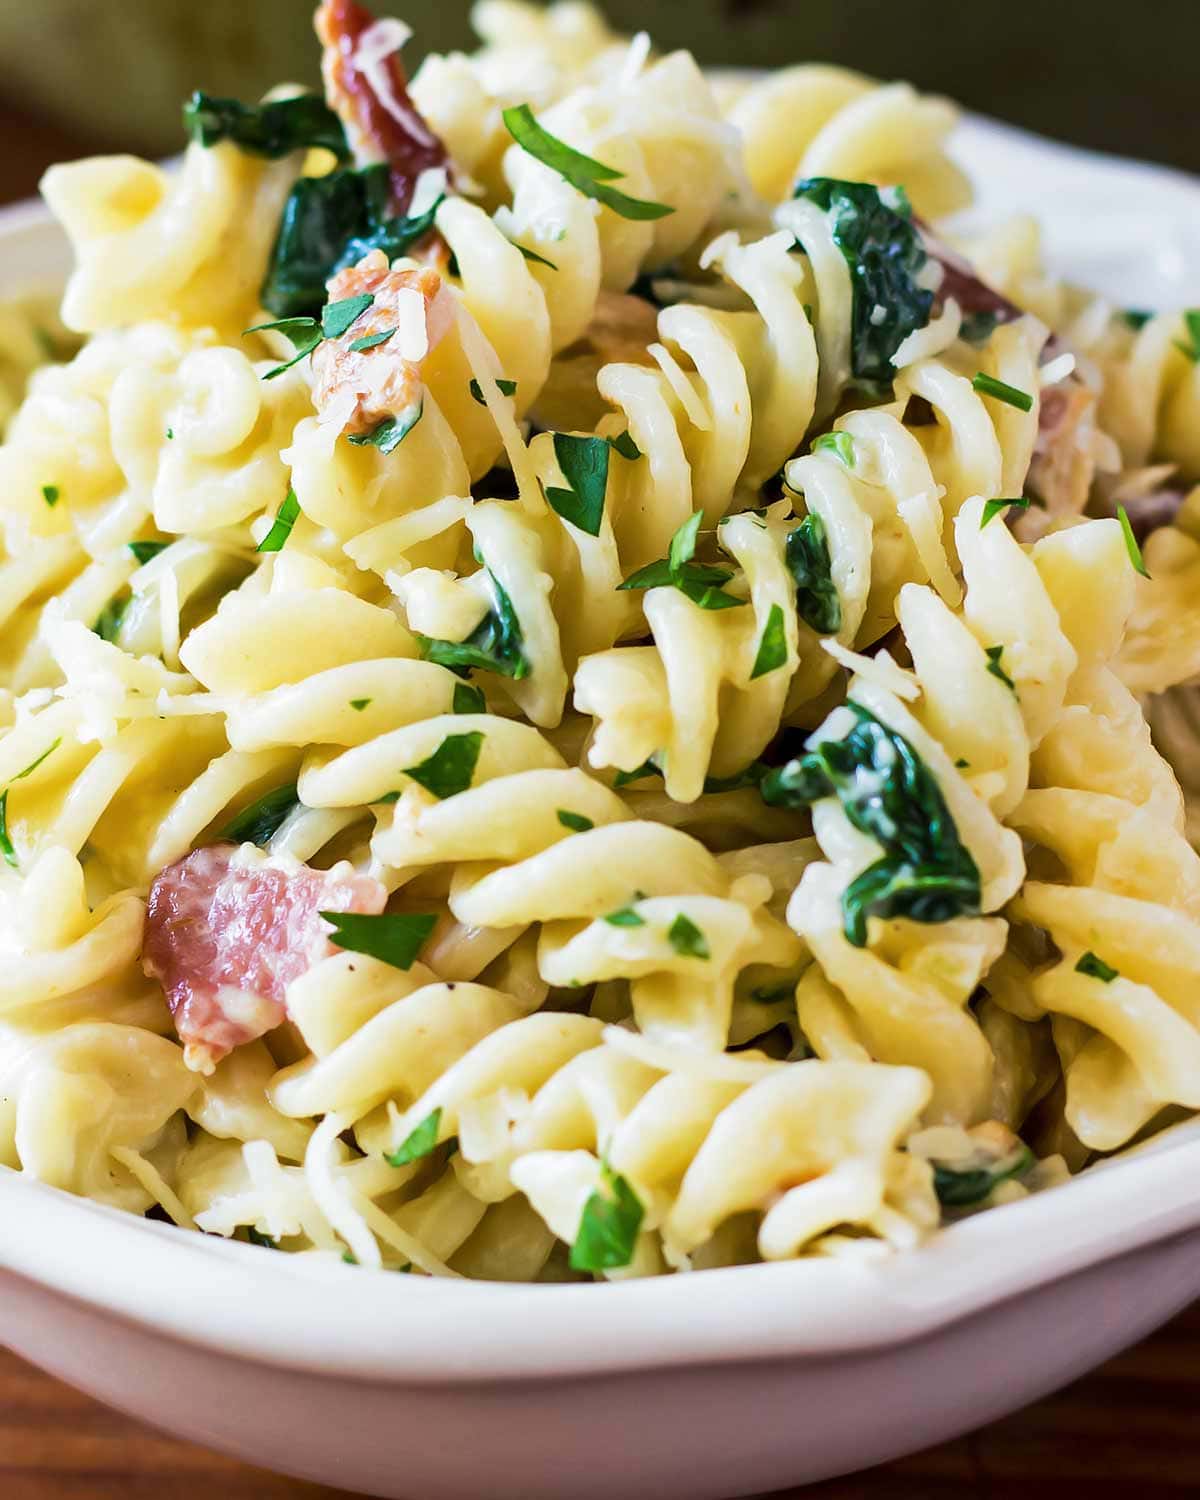 Spiral pasta with creamy bacon spinach sauce in bowl